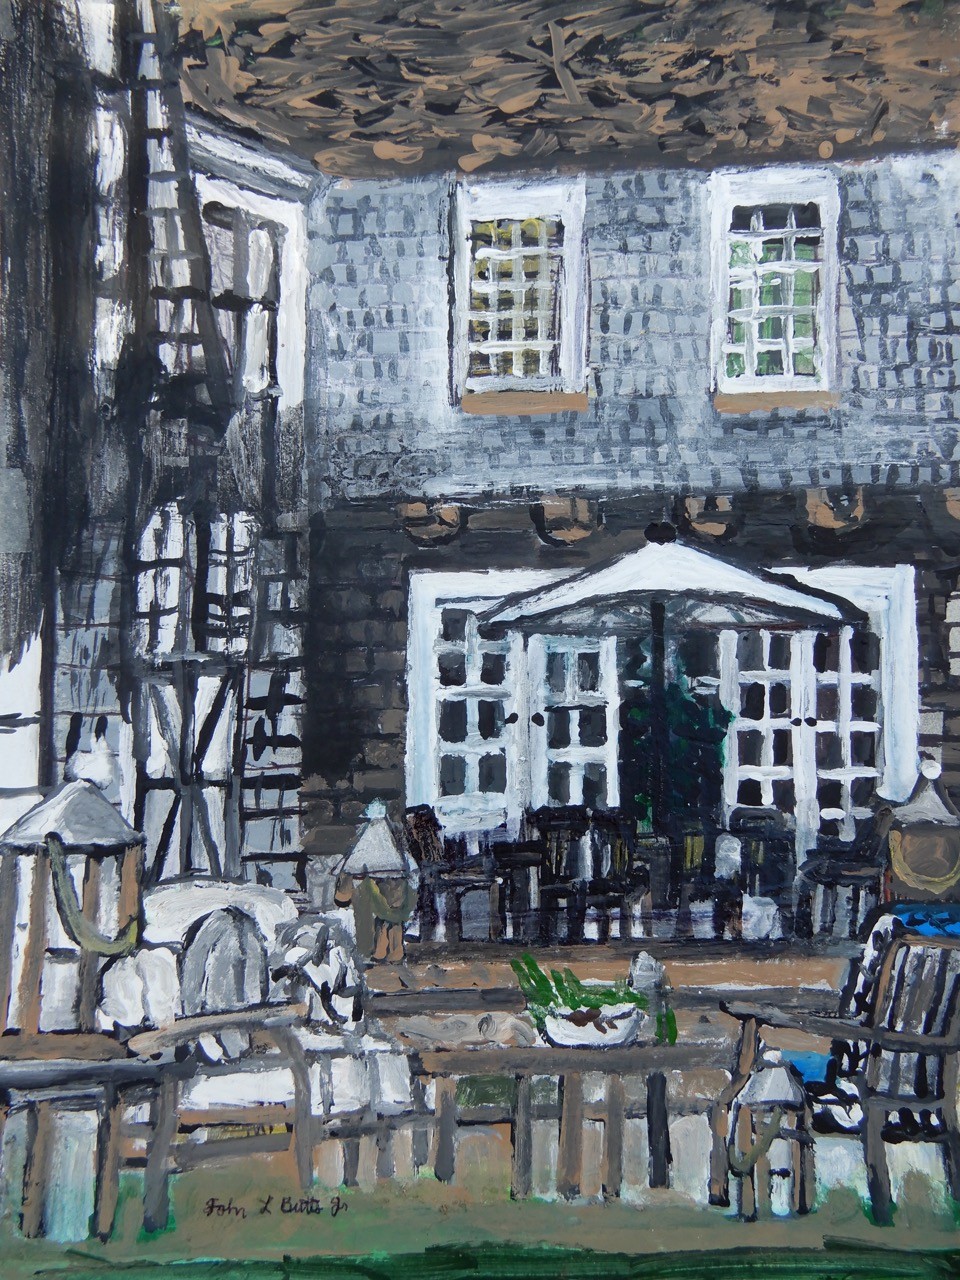 The painting depicts a patio outside of a house. There is a table in the center with a bowl of flowers. The entire painting is done in muted grays, whites and browns. There are no people in the scene